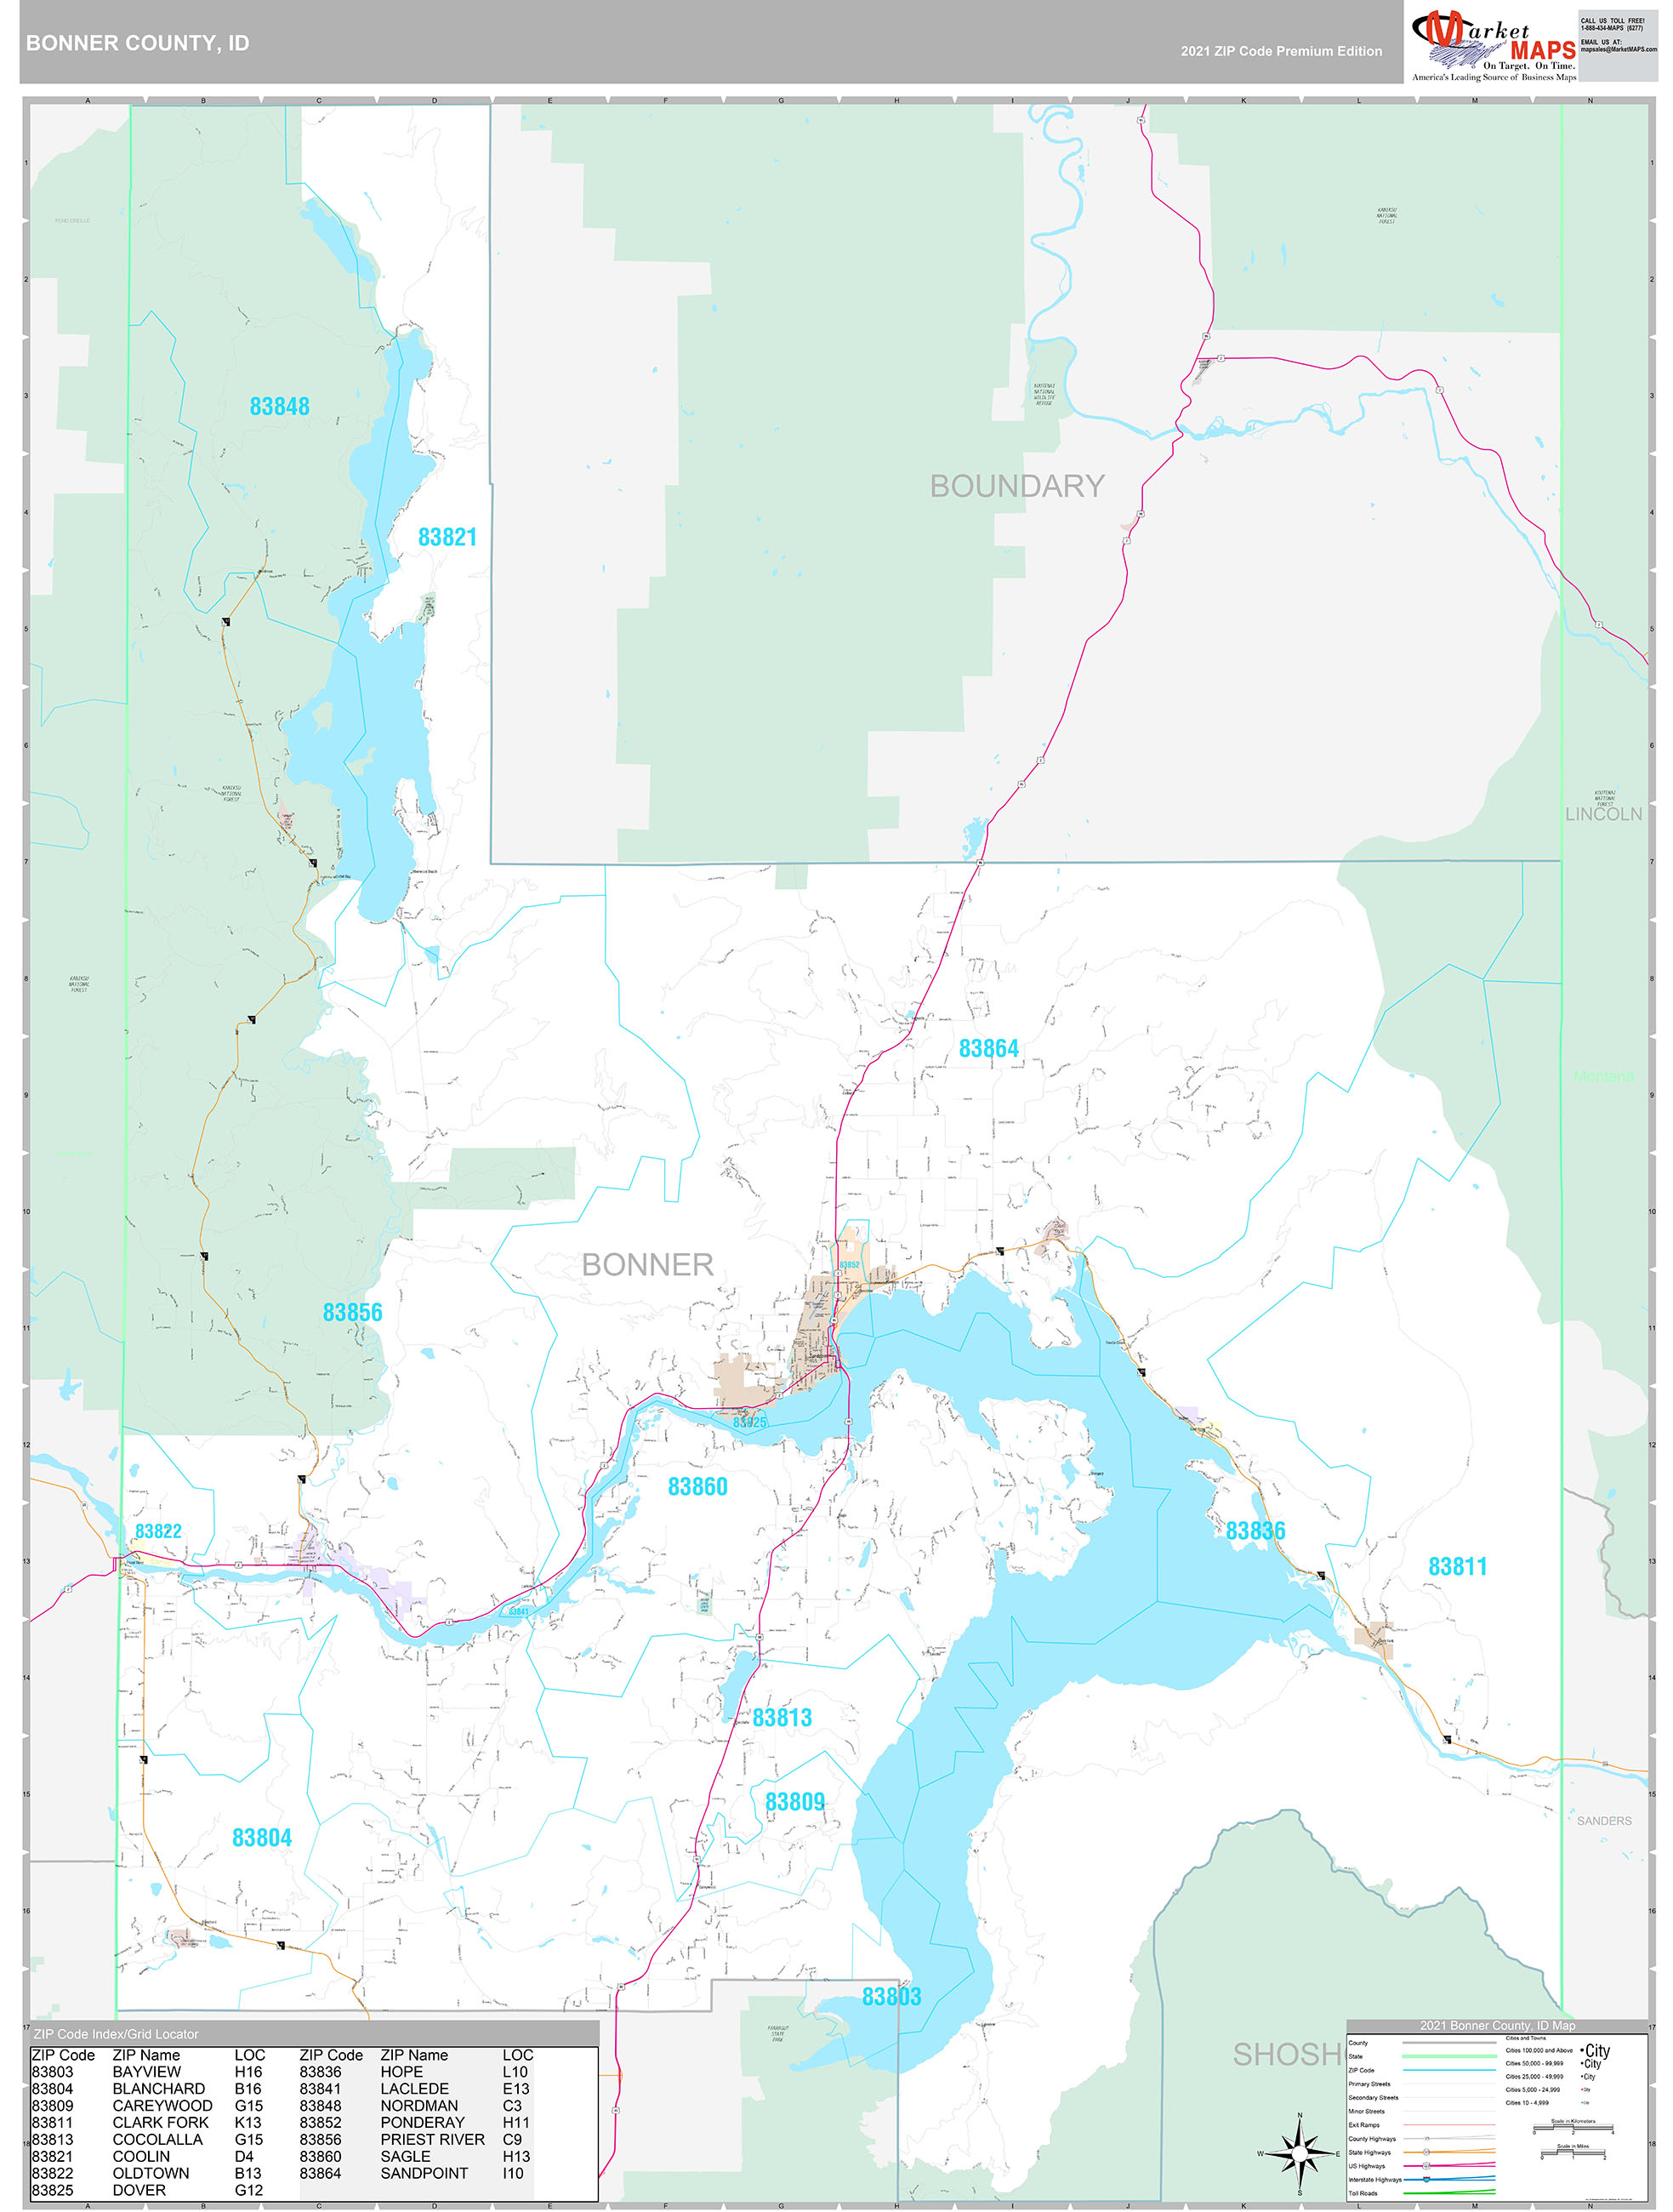 Bonner County, ID Wall Map Premium Style by MarketMAPS